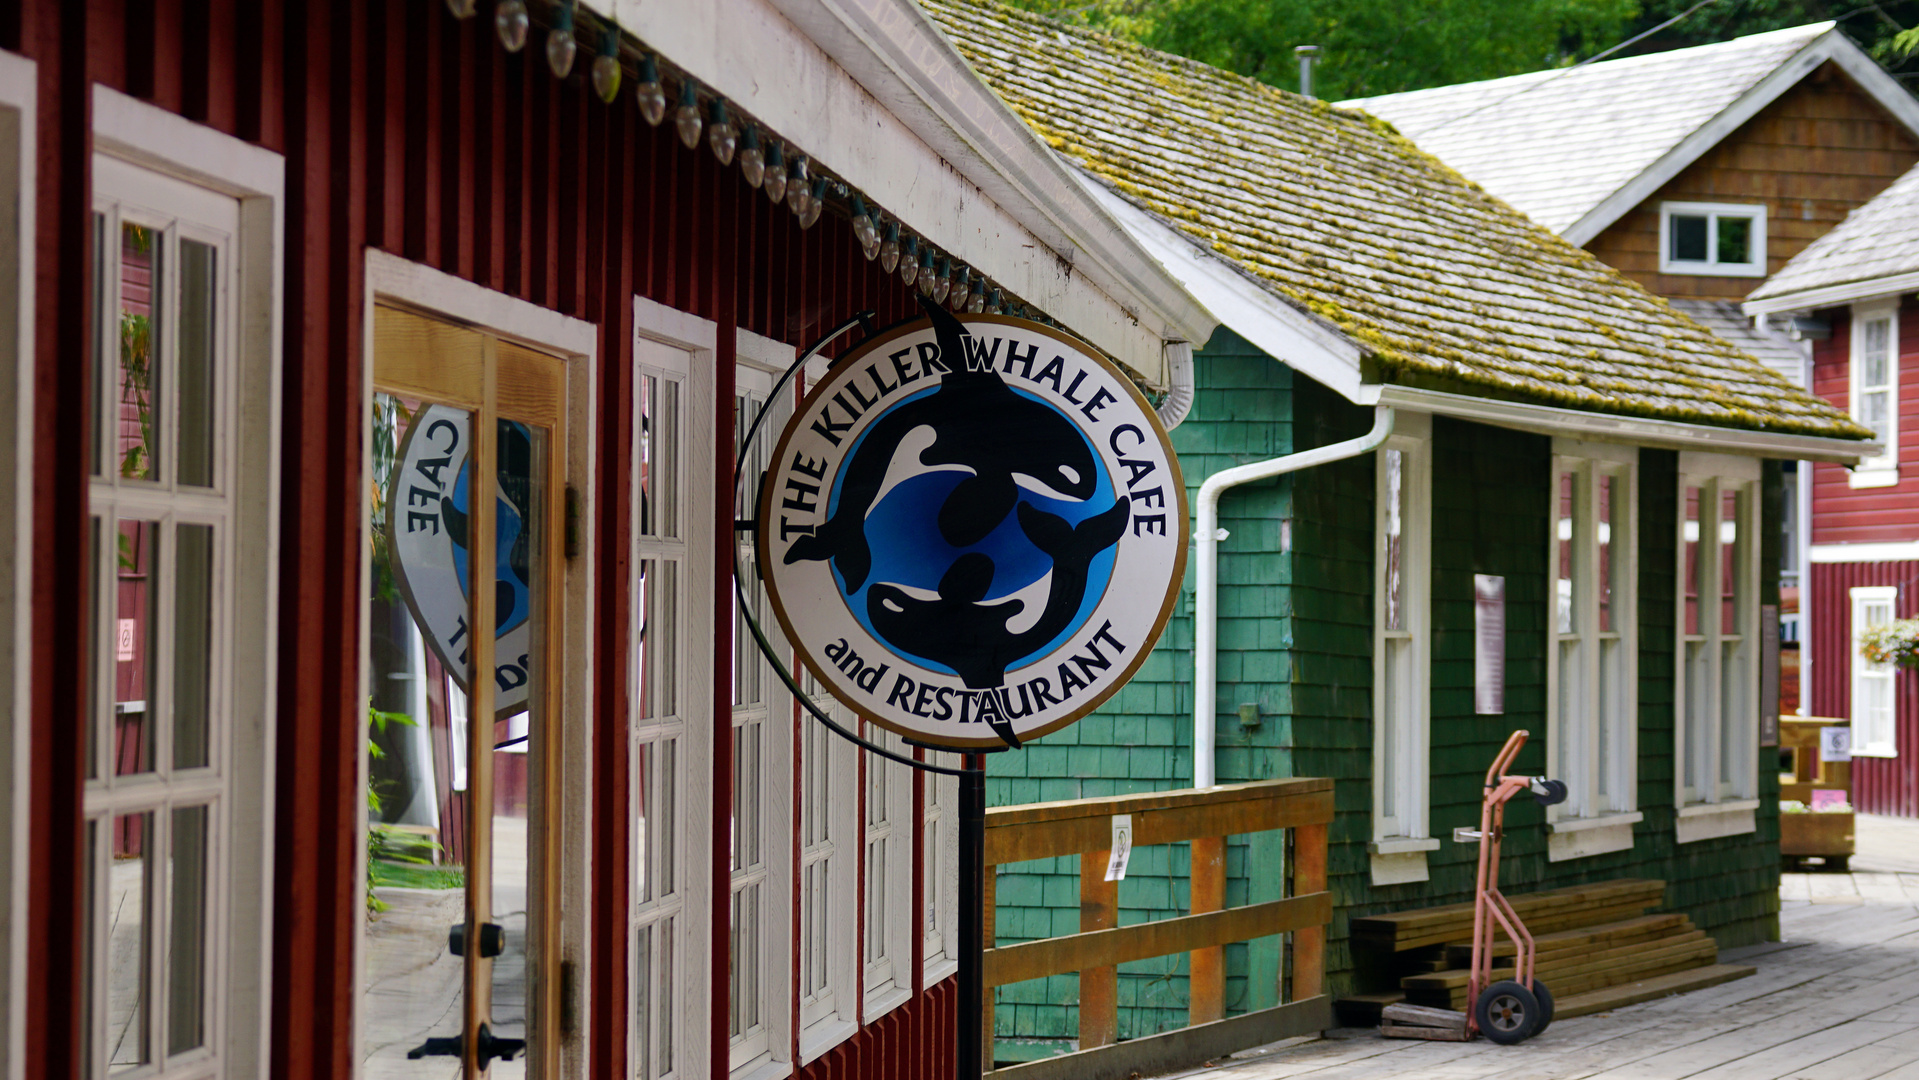 The Killer Whale Cafe